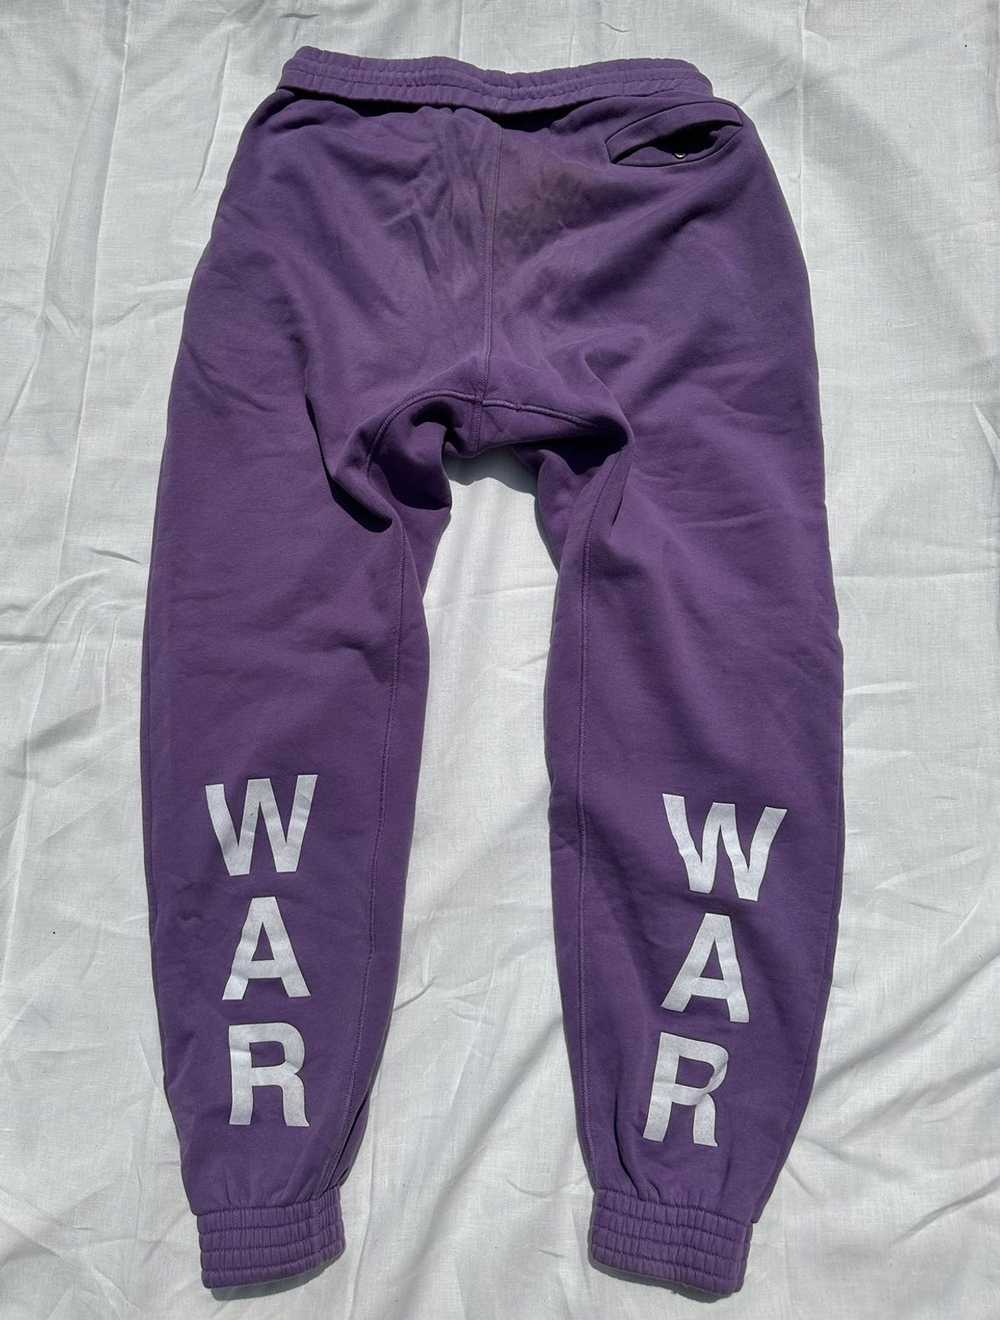 Off-White Seeing Things Sweatpants - image 2